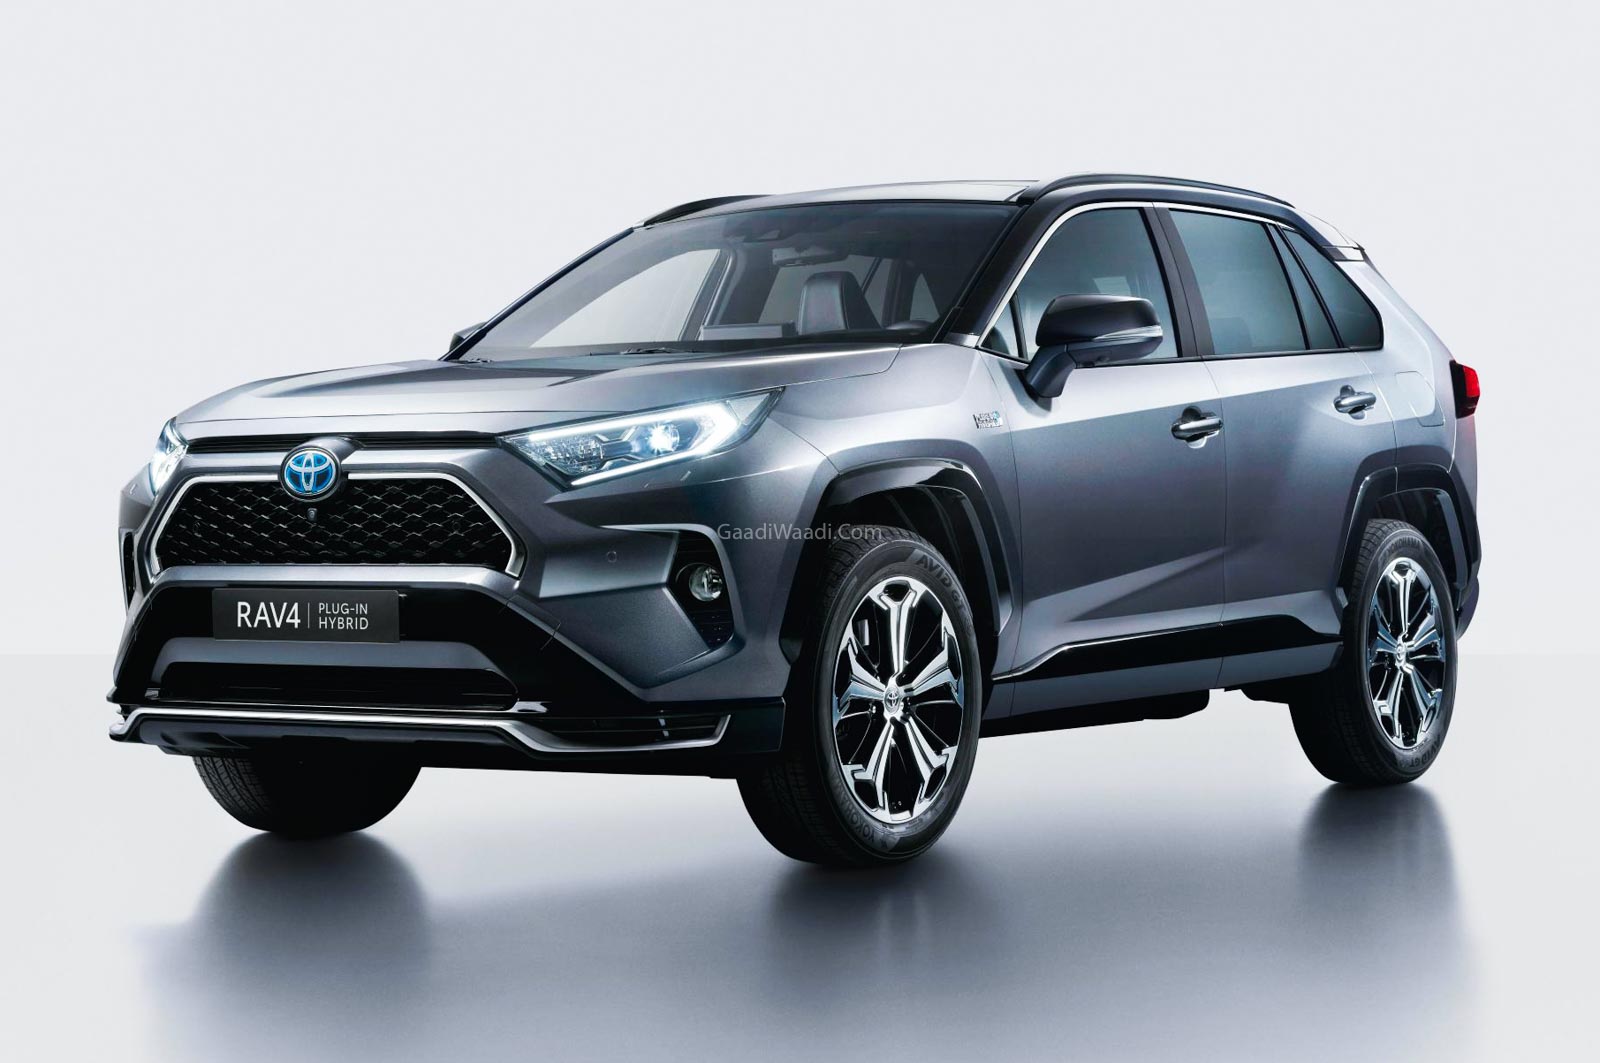 Toyota To Launch RAV4 SUV Next Year In India - Report